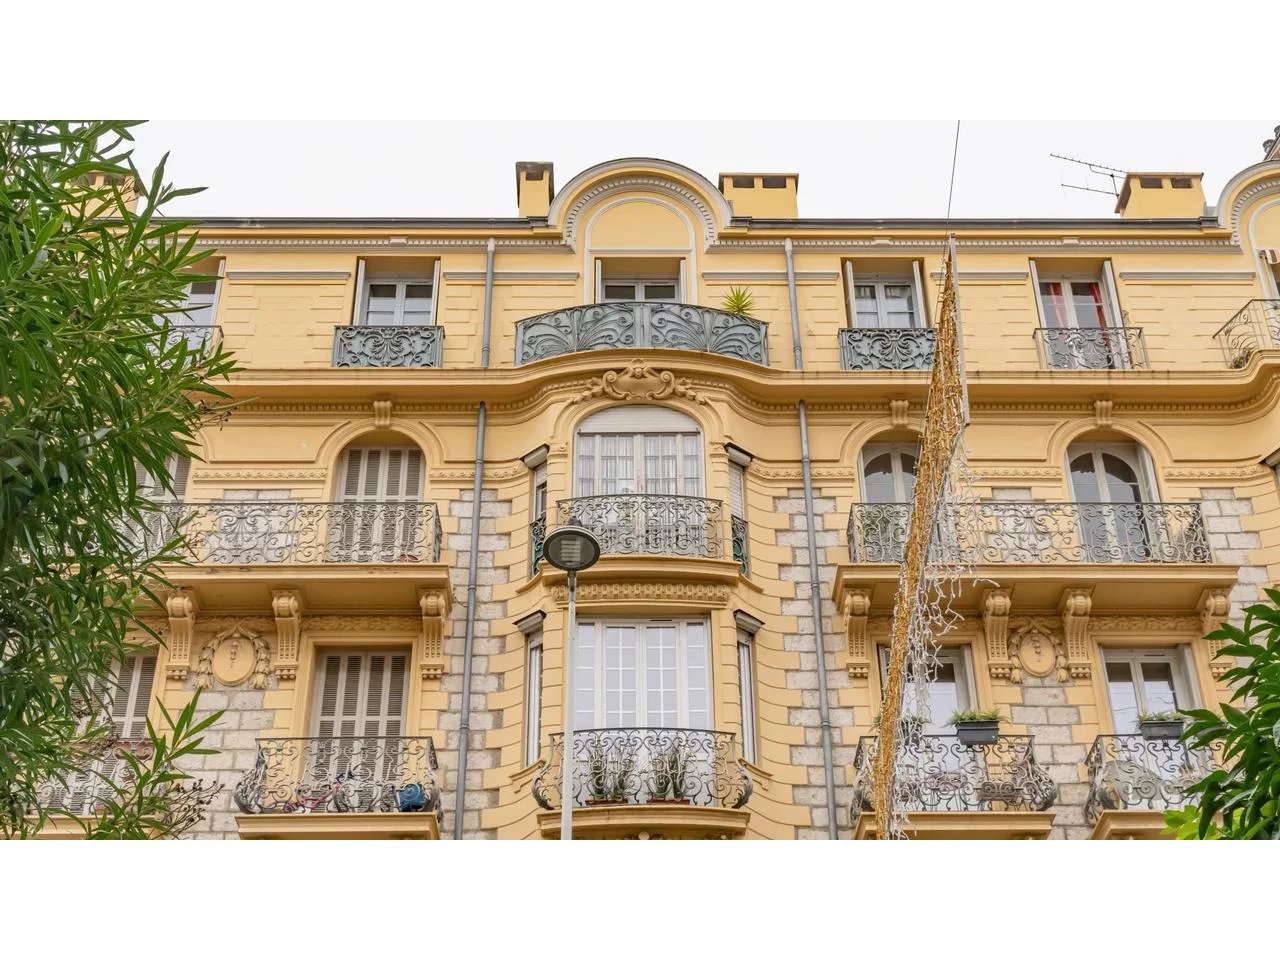 Appartement  4 Rooms 100m2  for sale   640 000 €